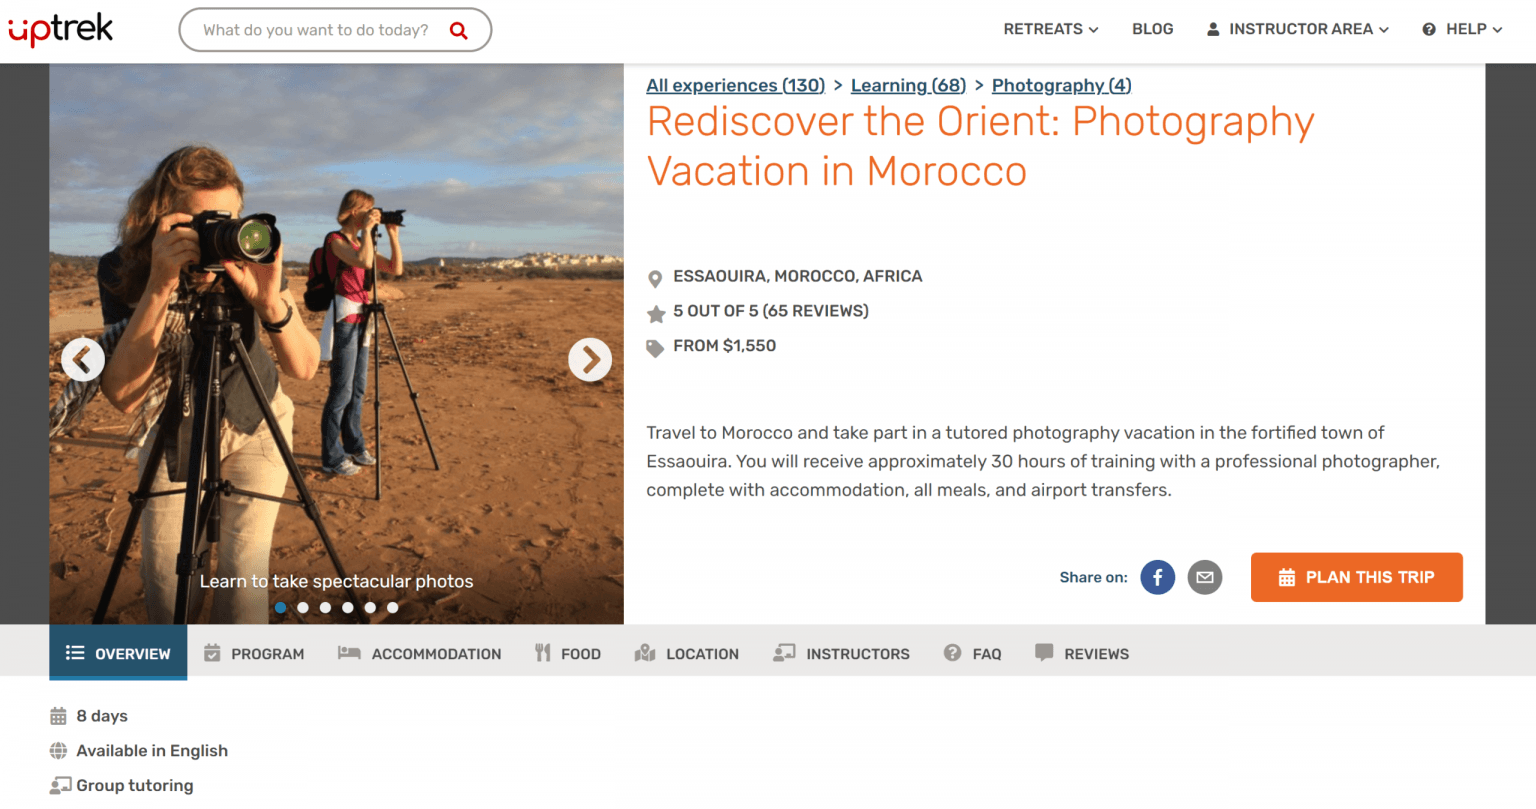 Rediscover the Orient: Photography Vacation in Morocco